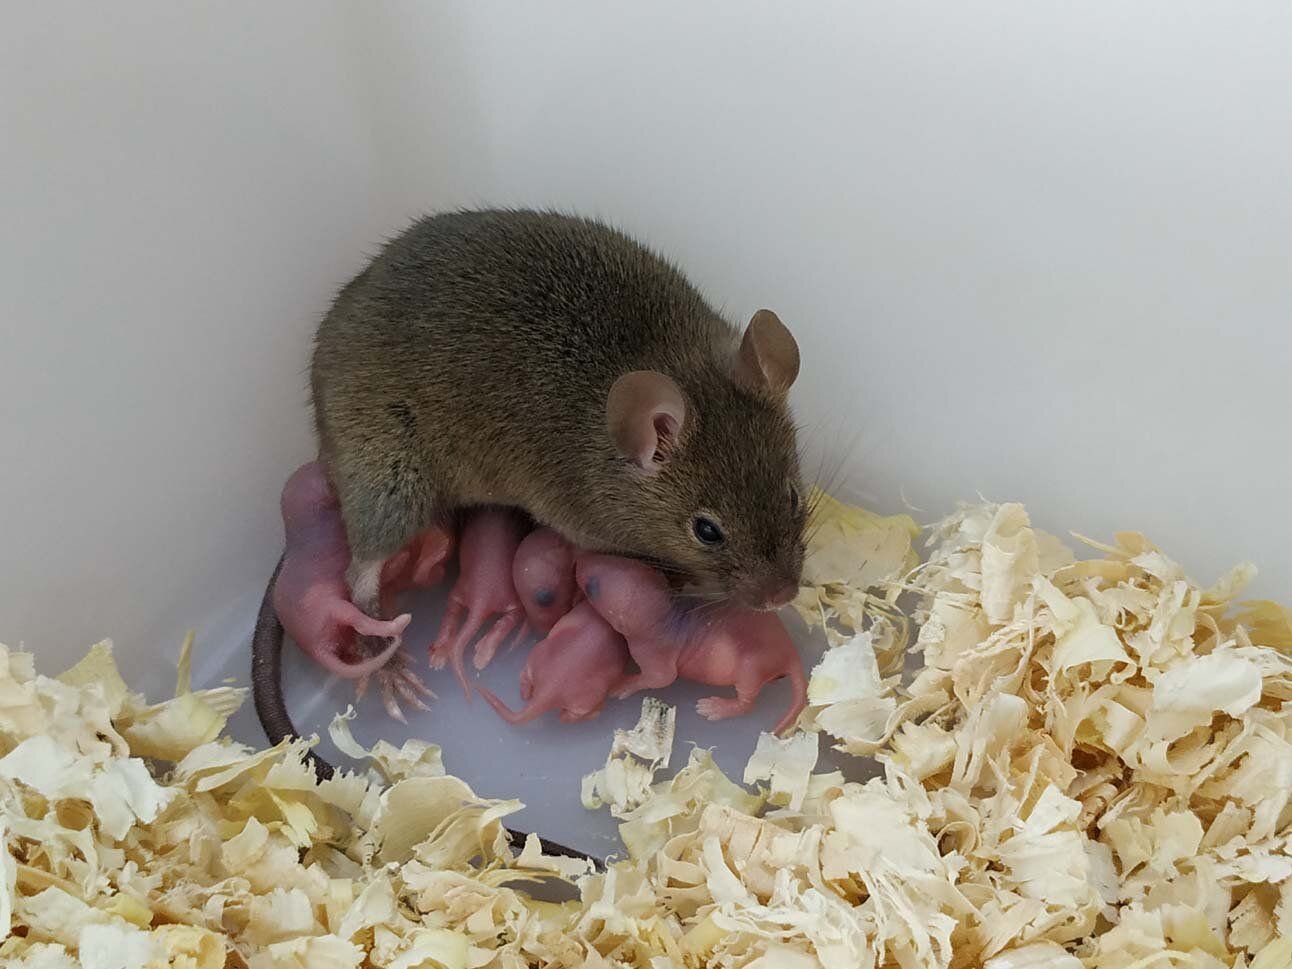 Mice Birthed From Unfertilized Eggs for the First Time | Smart News|  Smithsonian Magazine